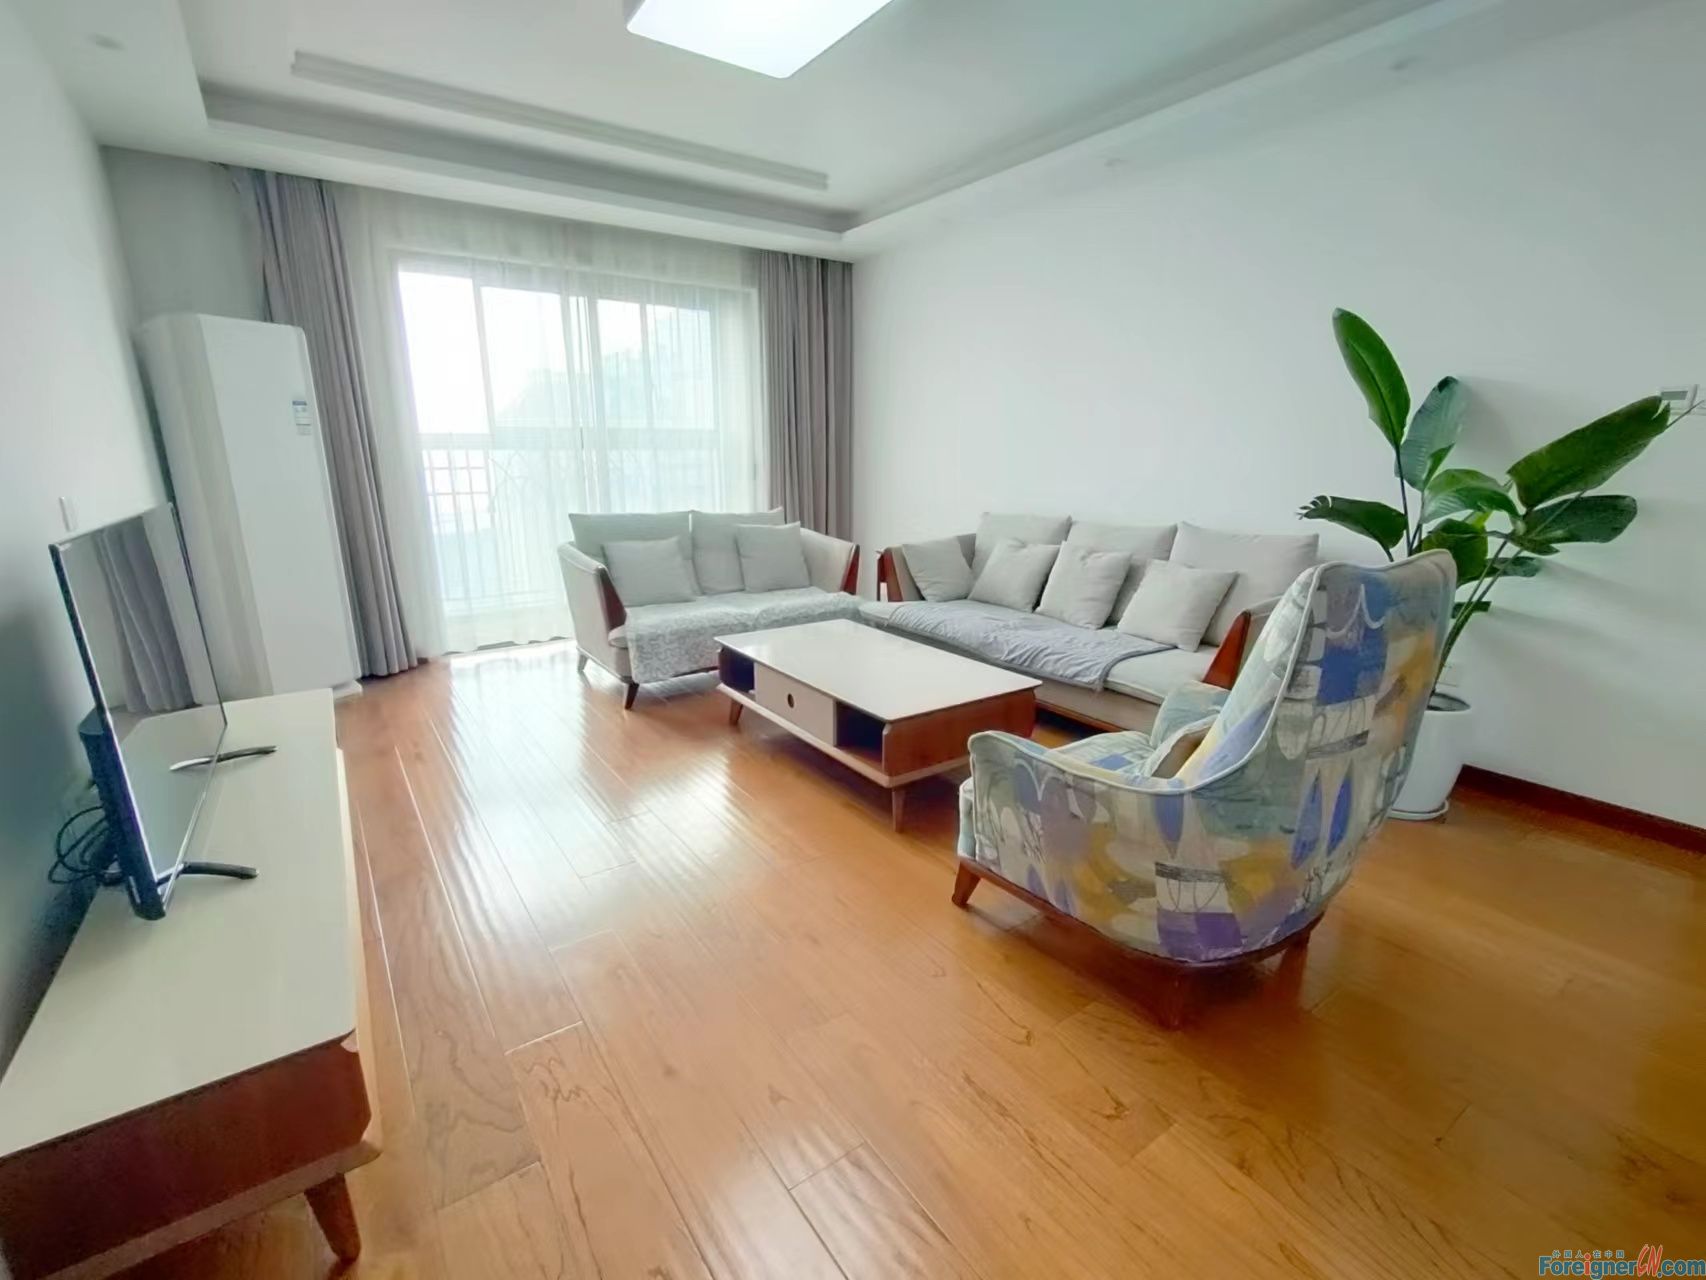 Fantastic!!! Lakeside Palace apartment /5 bedrooms and 3 bathrooms/ central AC, floor heating/Xinghai Square/SIP/Suzhou Culture and Expo Shopping Center/subway station 